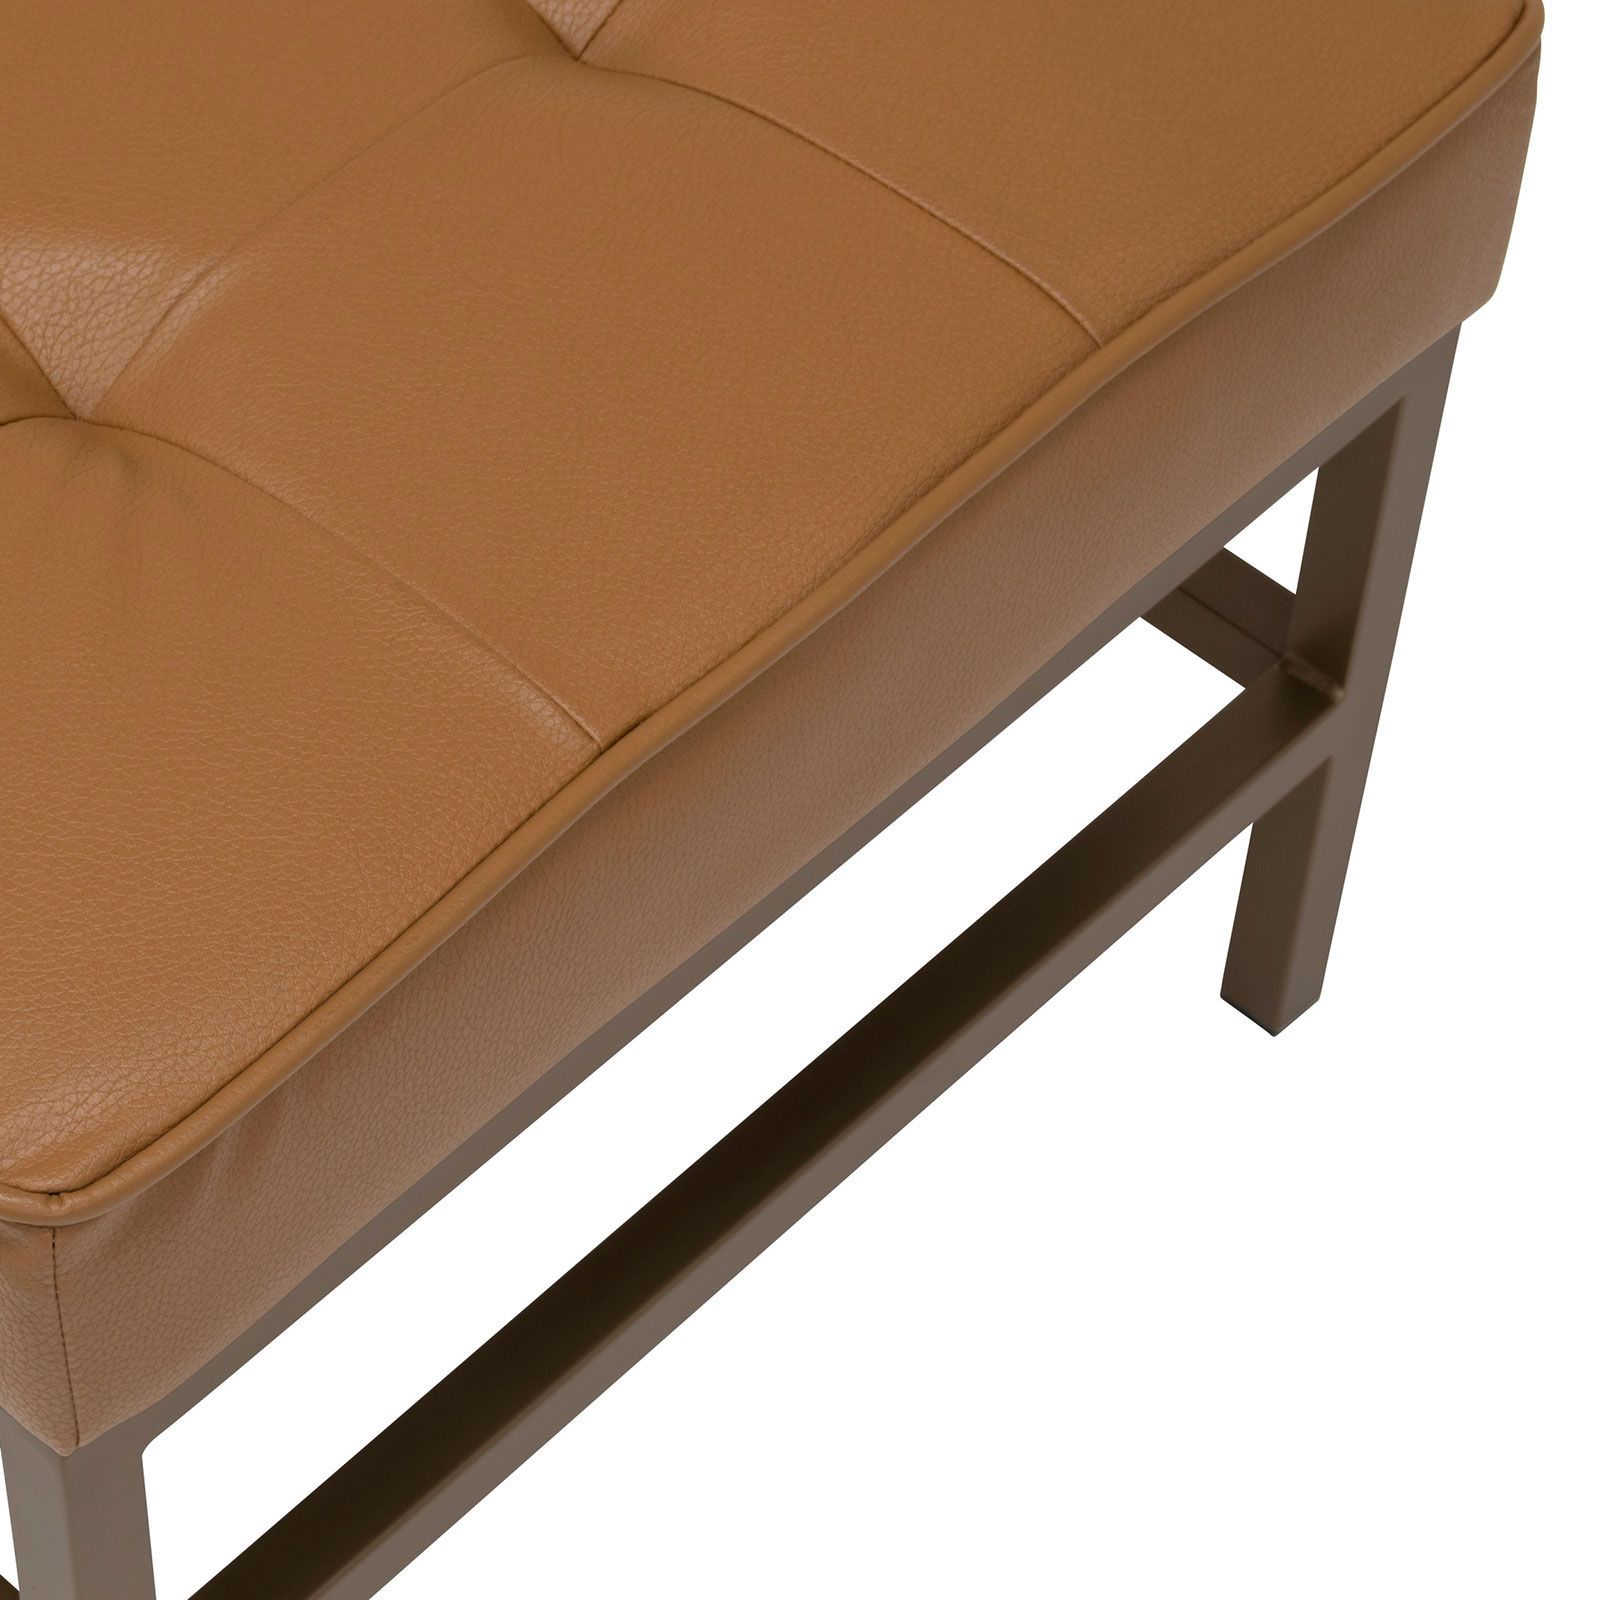 Ashlar Bonded Leather Tufted Ottoman In Bronze/caramel – Item # 70211 Intended For Trendy Caramel Leather And Bronze Steel Tufted Square Ottomans (View 7 of 10)